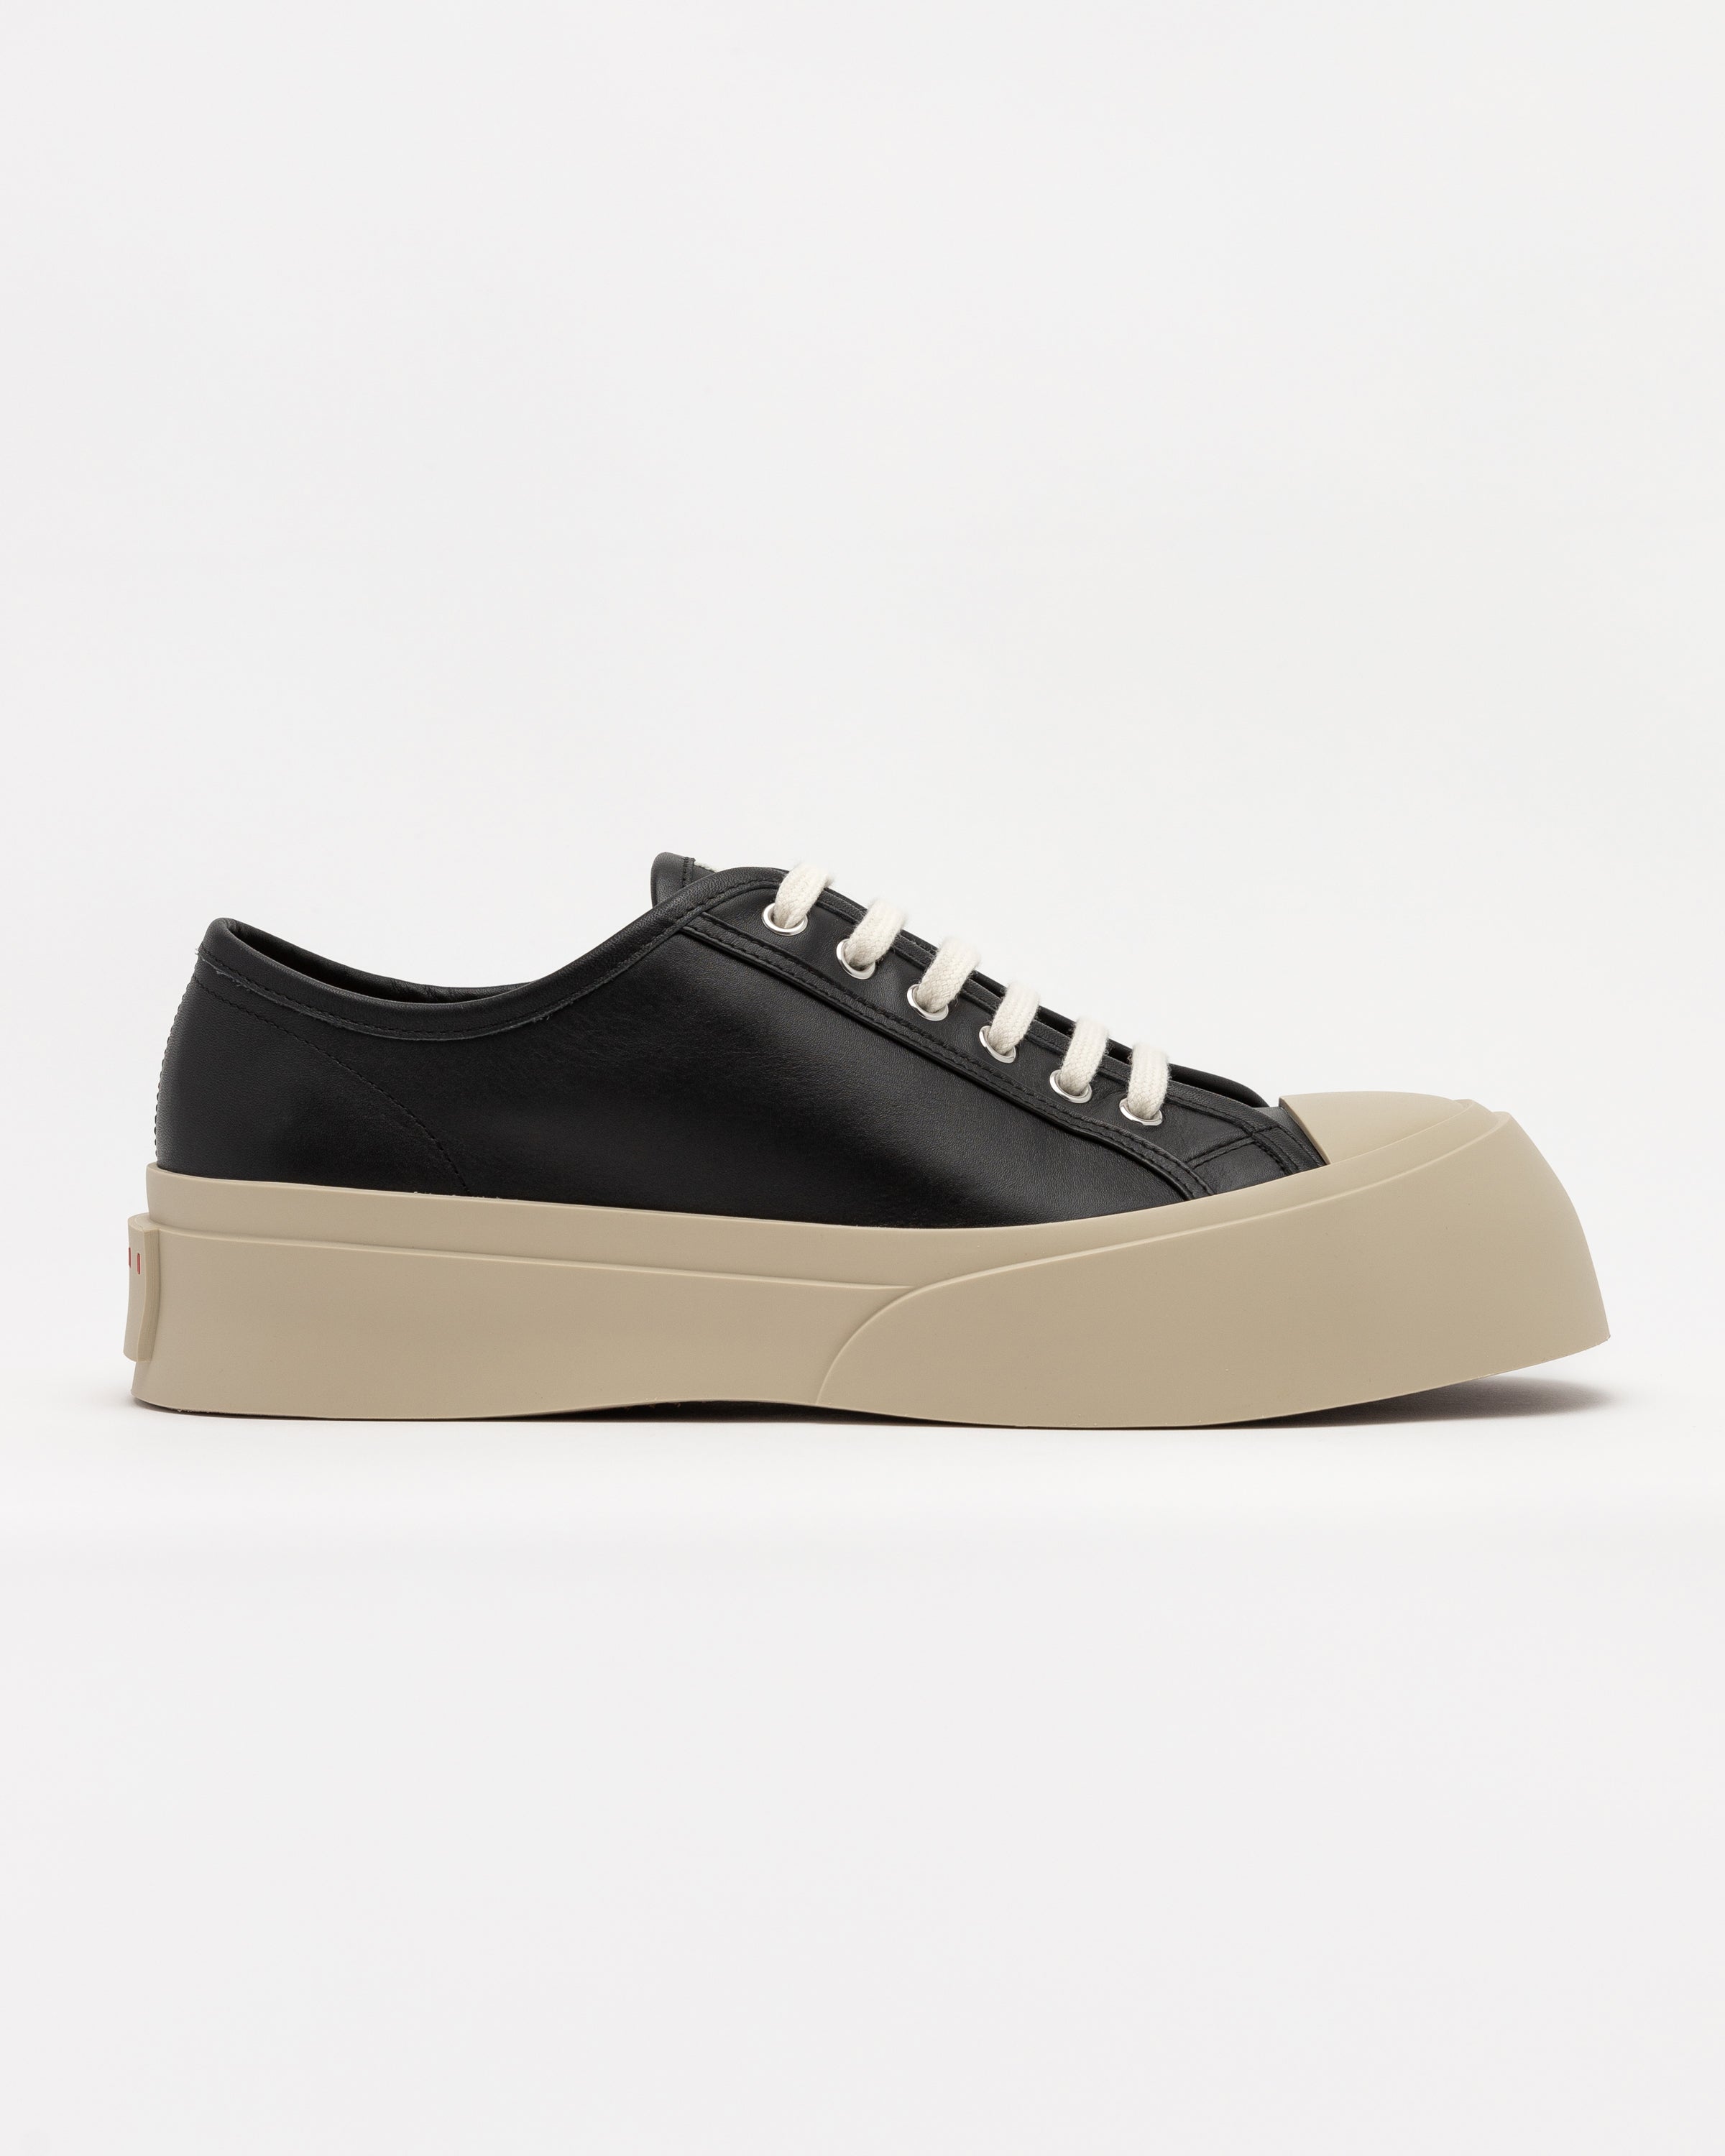 Pablo Lace-Up Sneaker in Black